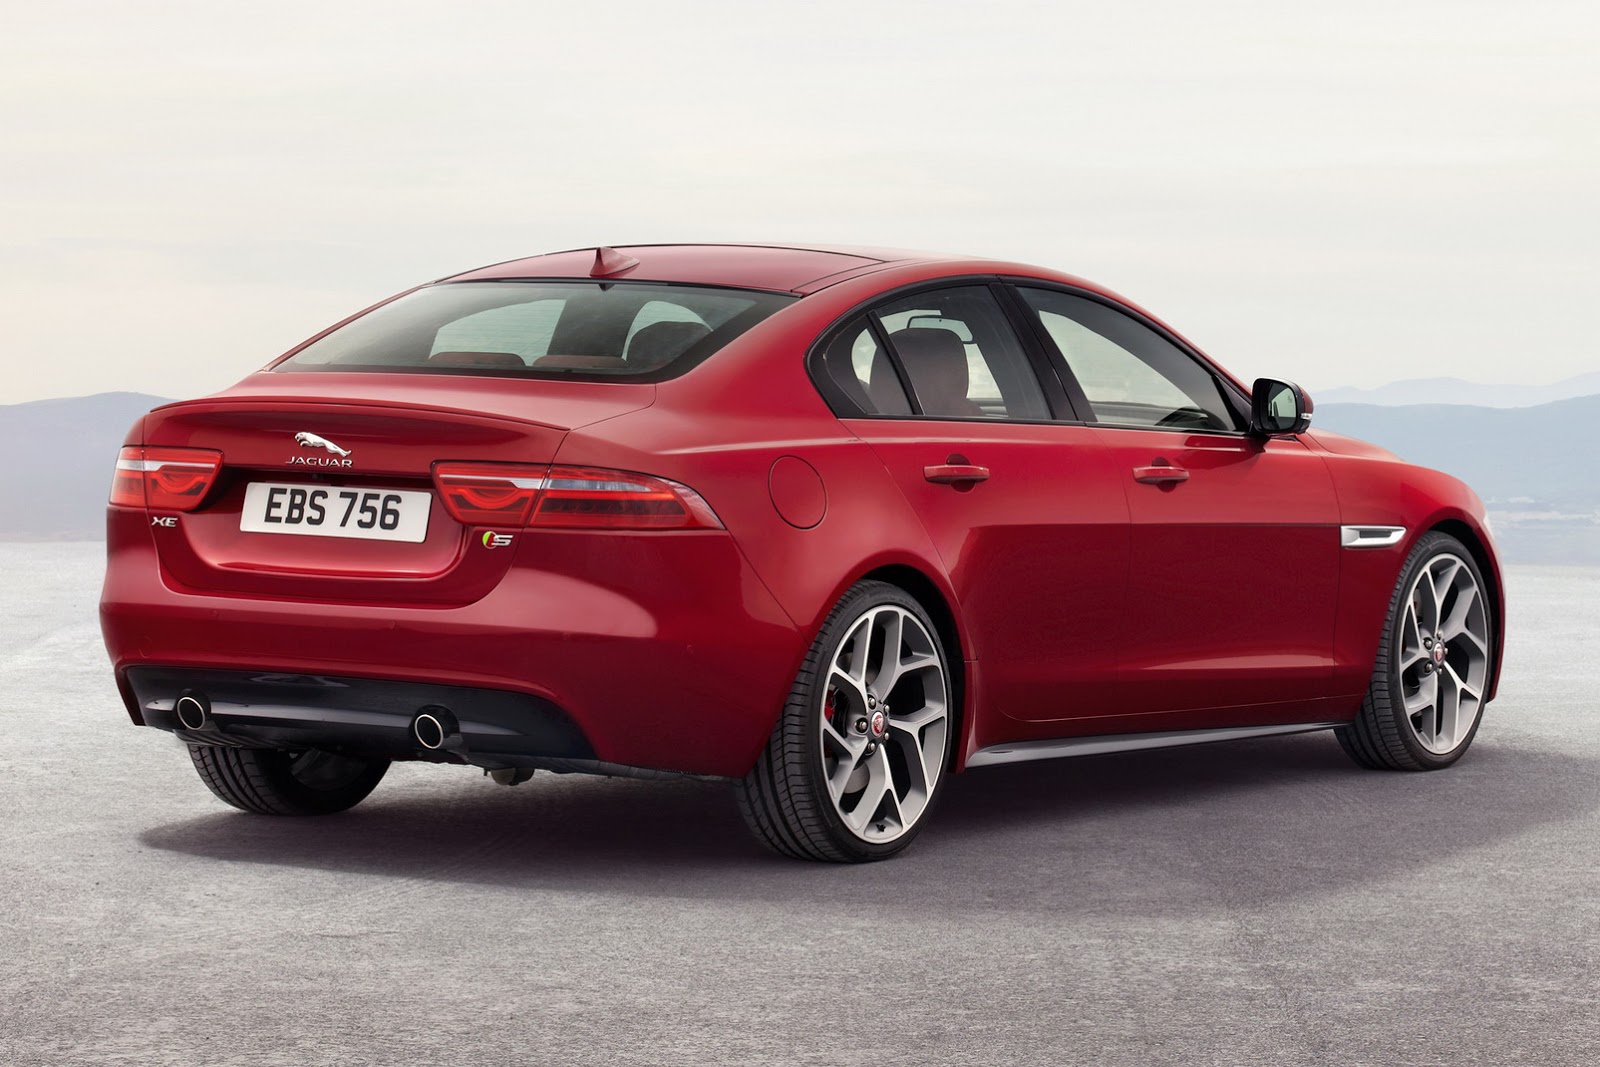 Jaguar XE Diesel India Launch To Take Place In April 2017 ...